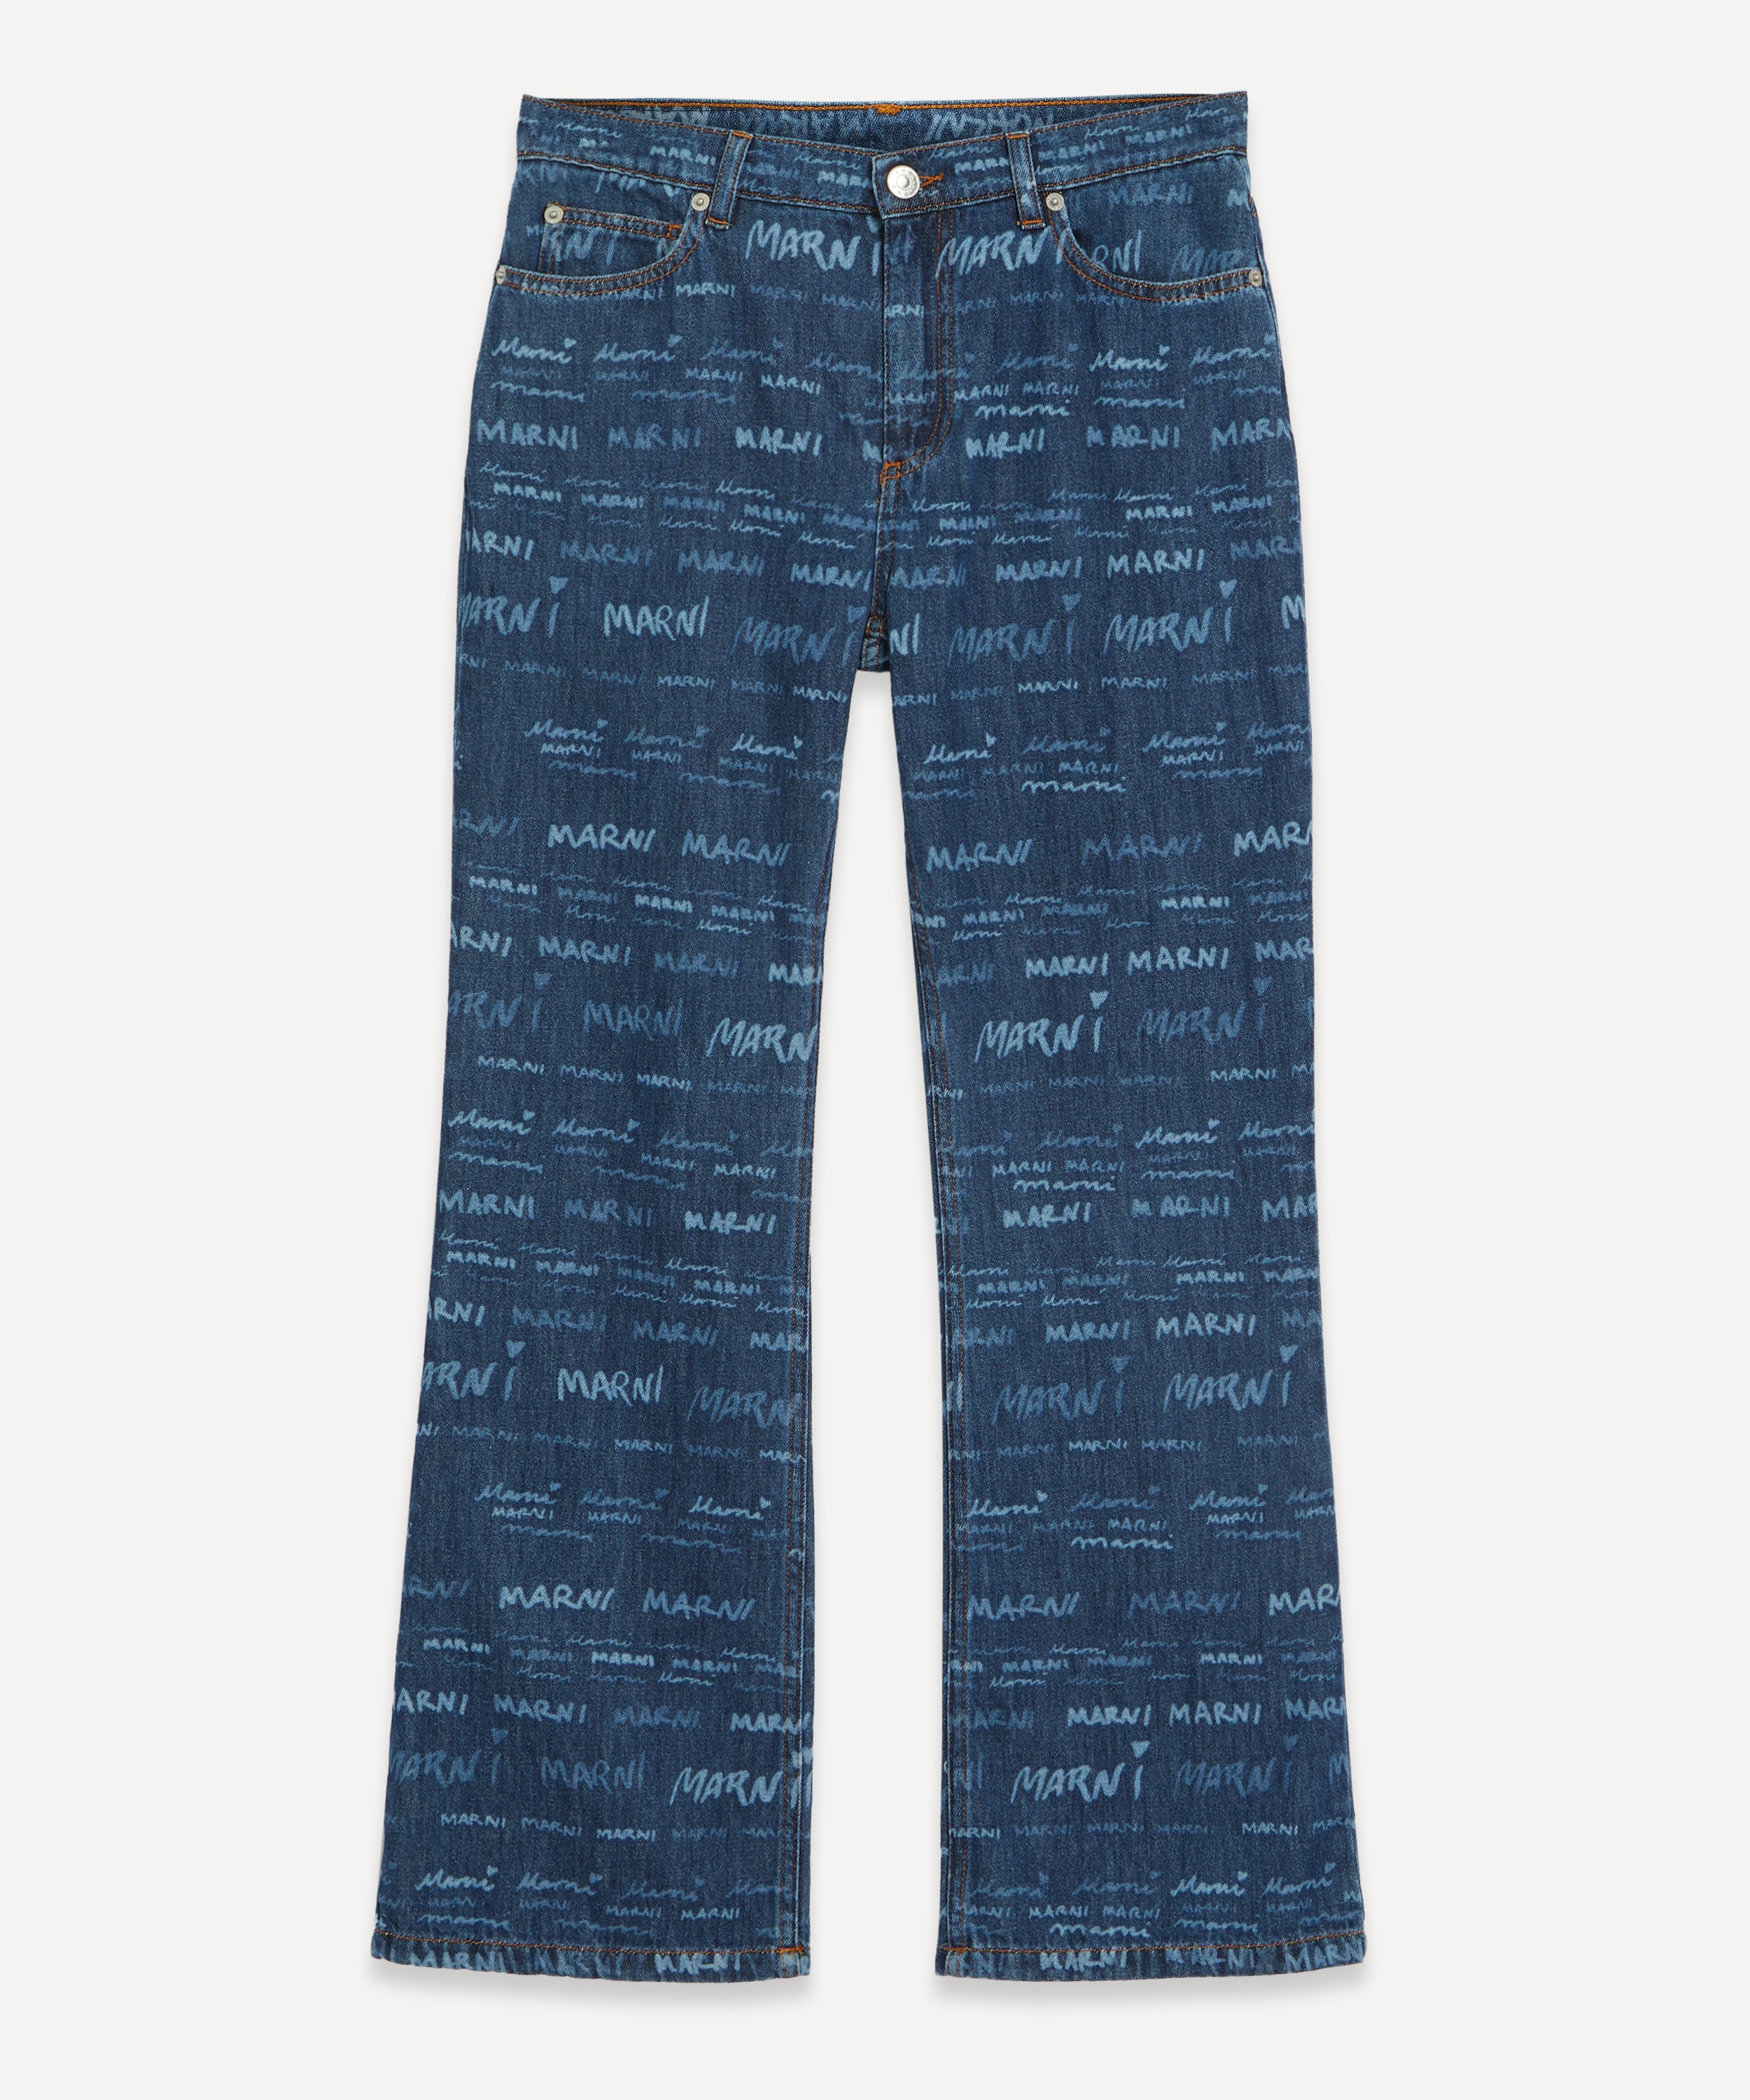 Deck pants denim jeans with glitters buttons in the bottom of the